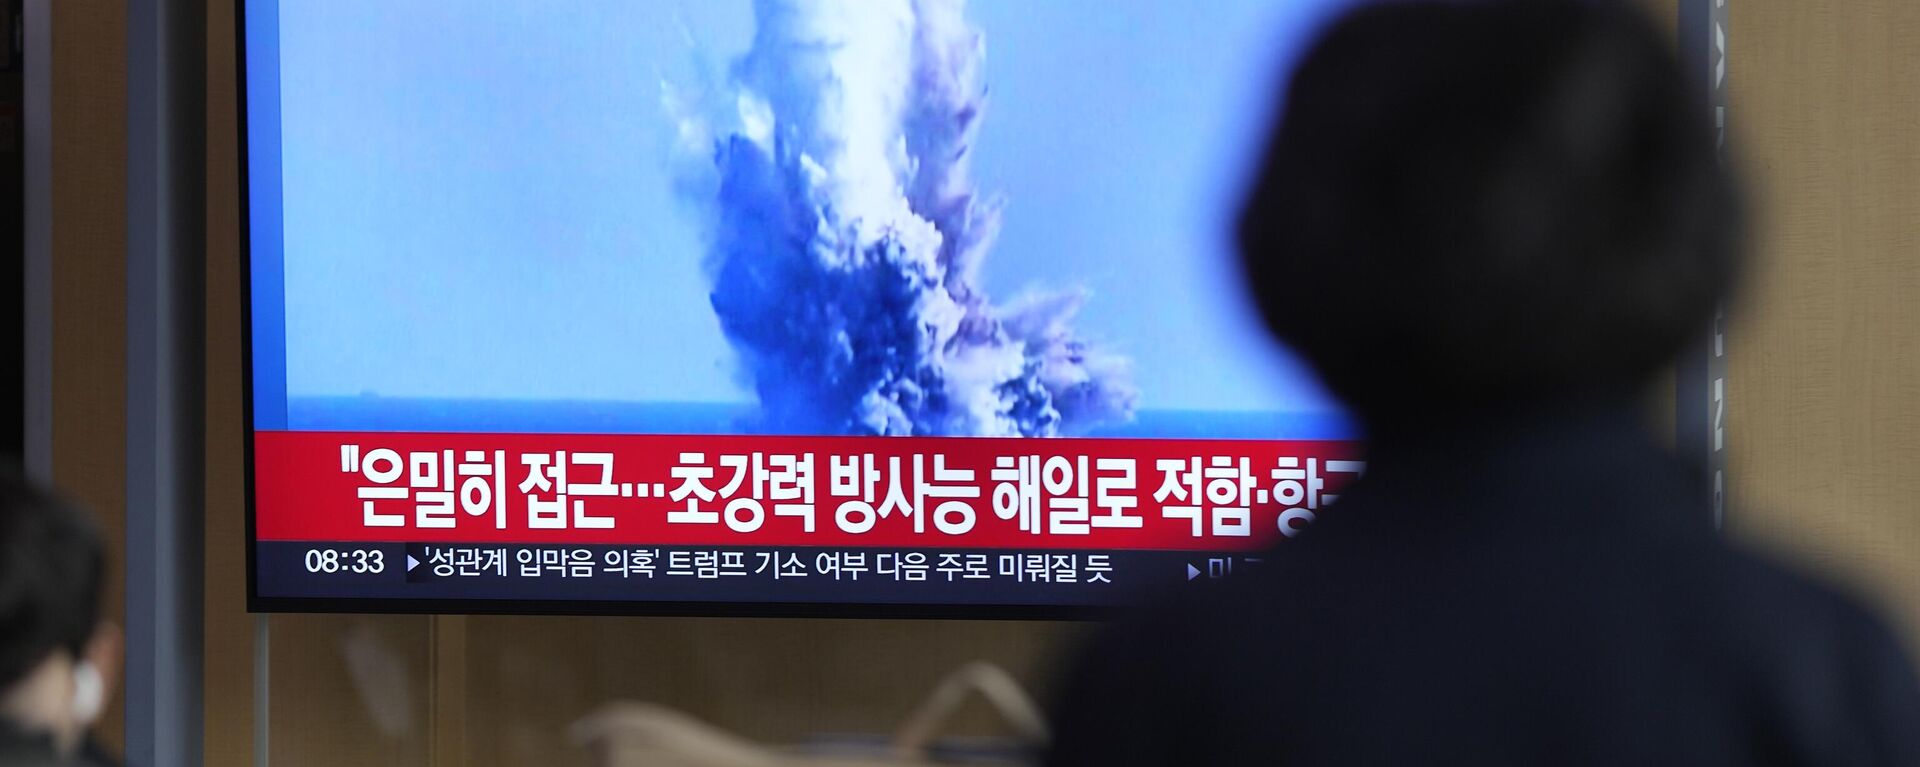 A TV screen shows a recent image released by Pyongyang’s official Korean Central News Agency during a news program at the Seoul Railway Station in Seoul, South Korea, Friday, March 24, 2023. North Korea said Friday its cruise missile launches this week were part of nuclear attack simulations that also involved a detonation by a purported underwater drone as leader Kim Jong Un vowed to make his rivals plunge into despair. - Sputnik International, 1920, 15.06.2023